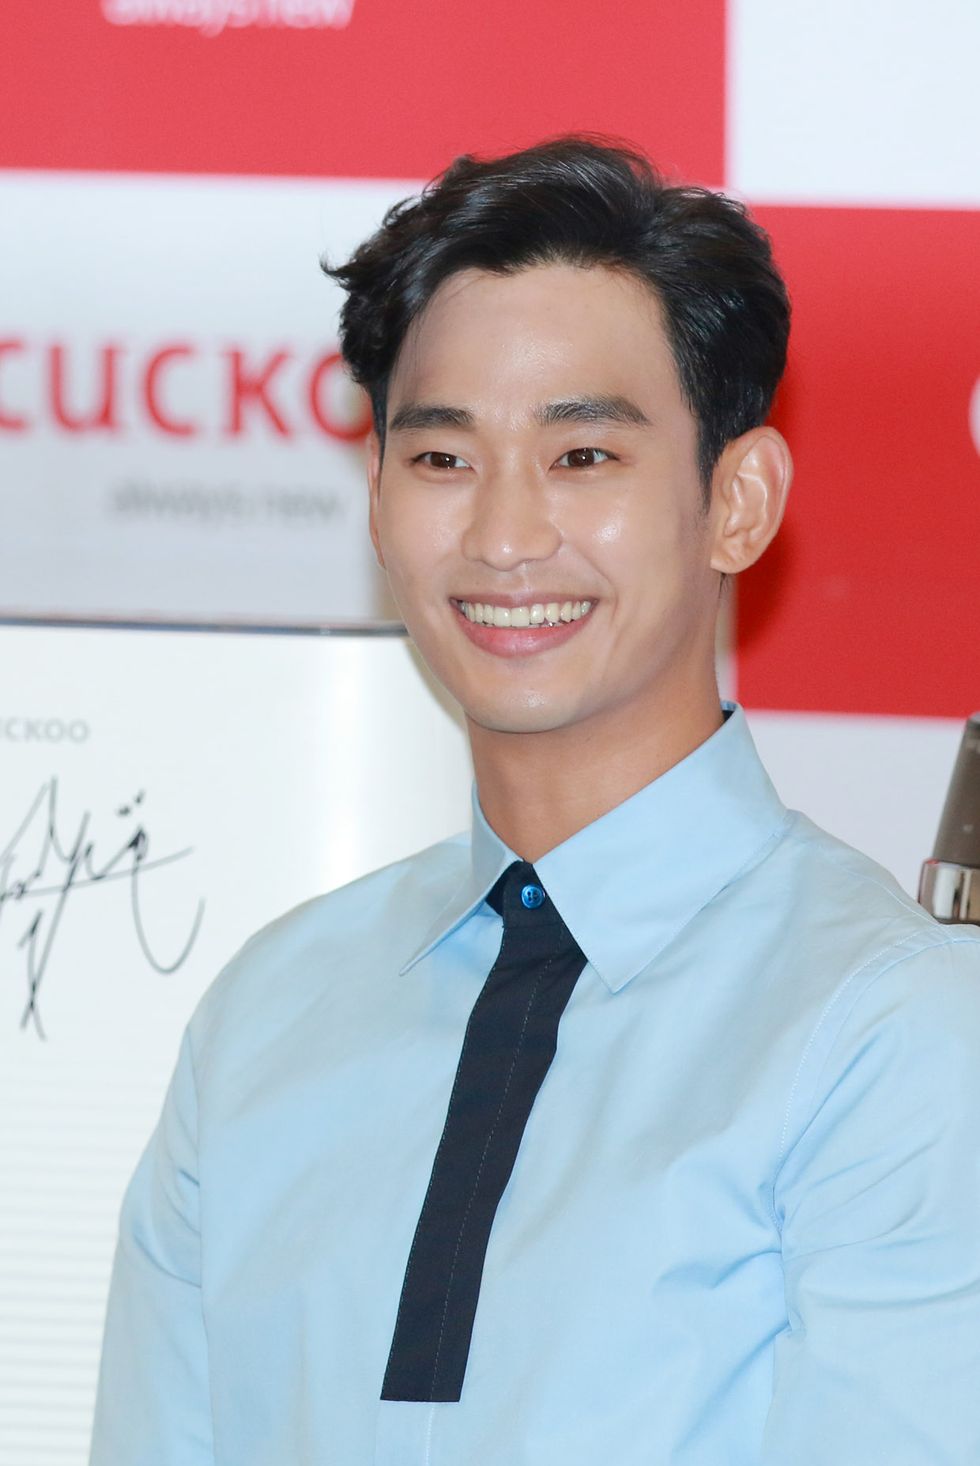 kim soo hyun attends commercial event in seoul